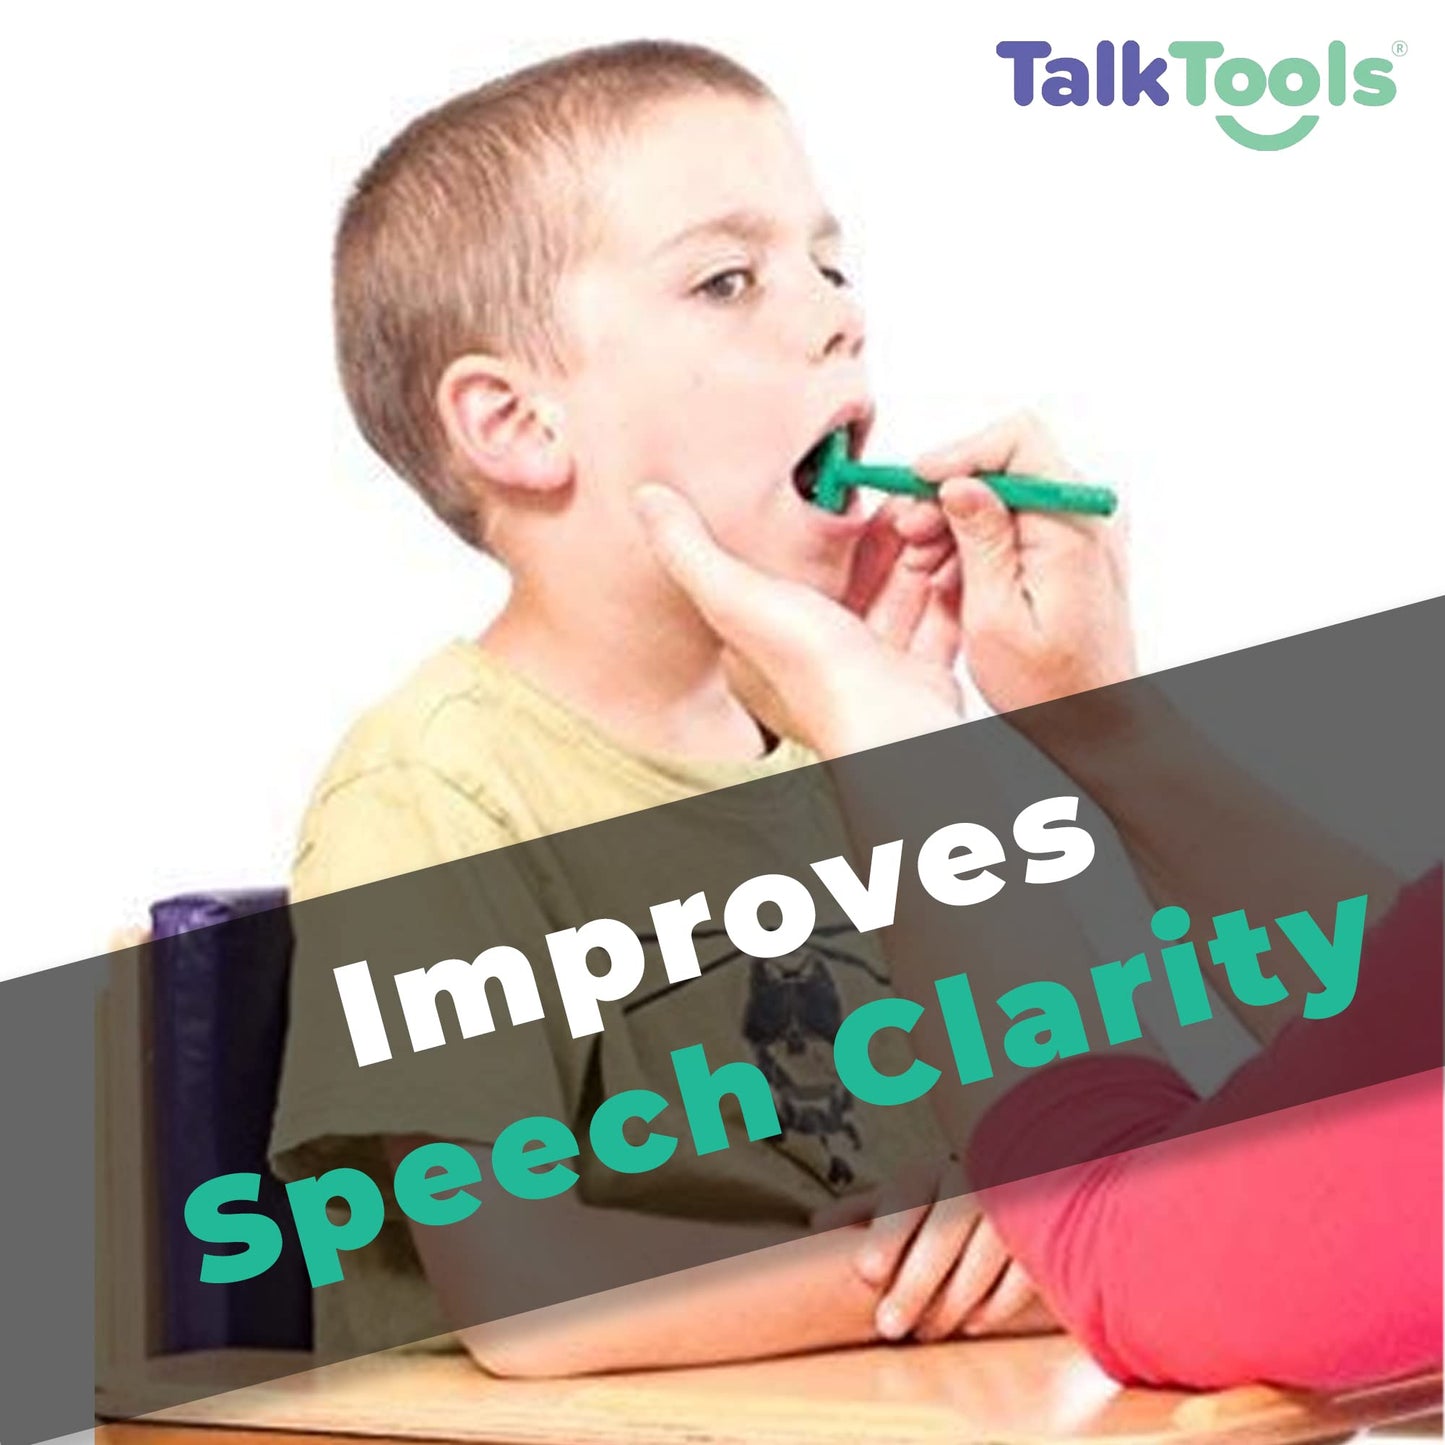 TalkTools Tongue Tip Lateralization & Elevation | Improves Feeding Skills and Speech Clarity | Promotes Tongue Tip Independent Movements from the Jaw